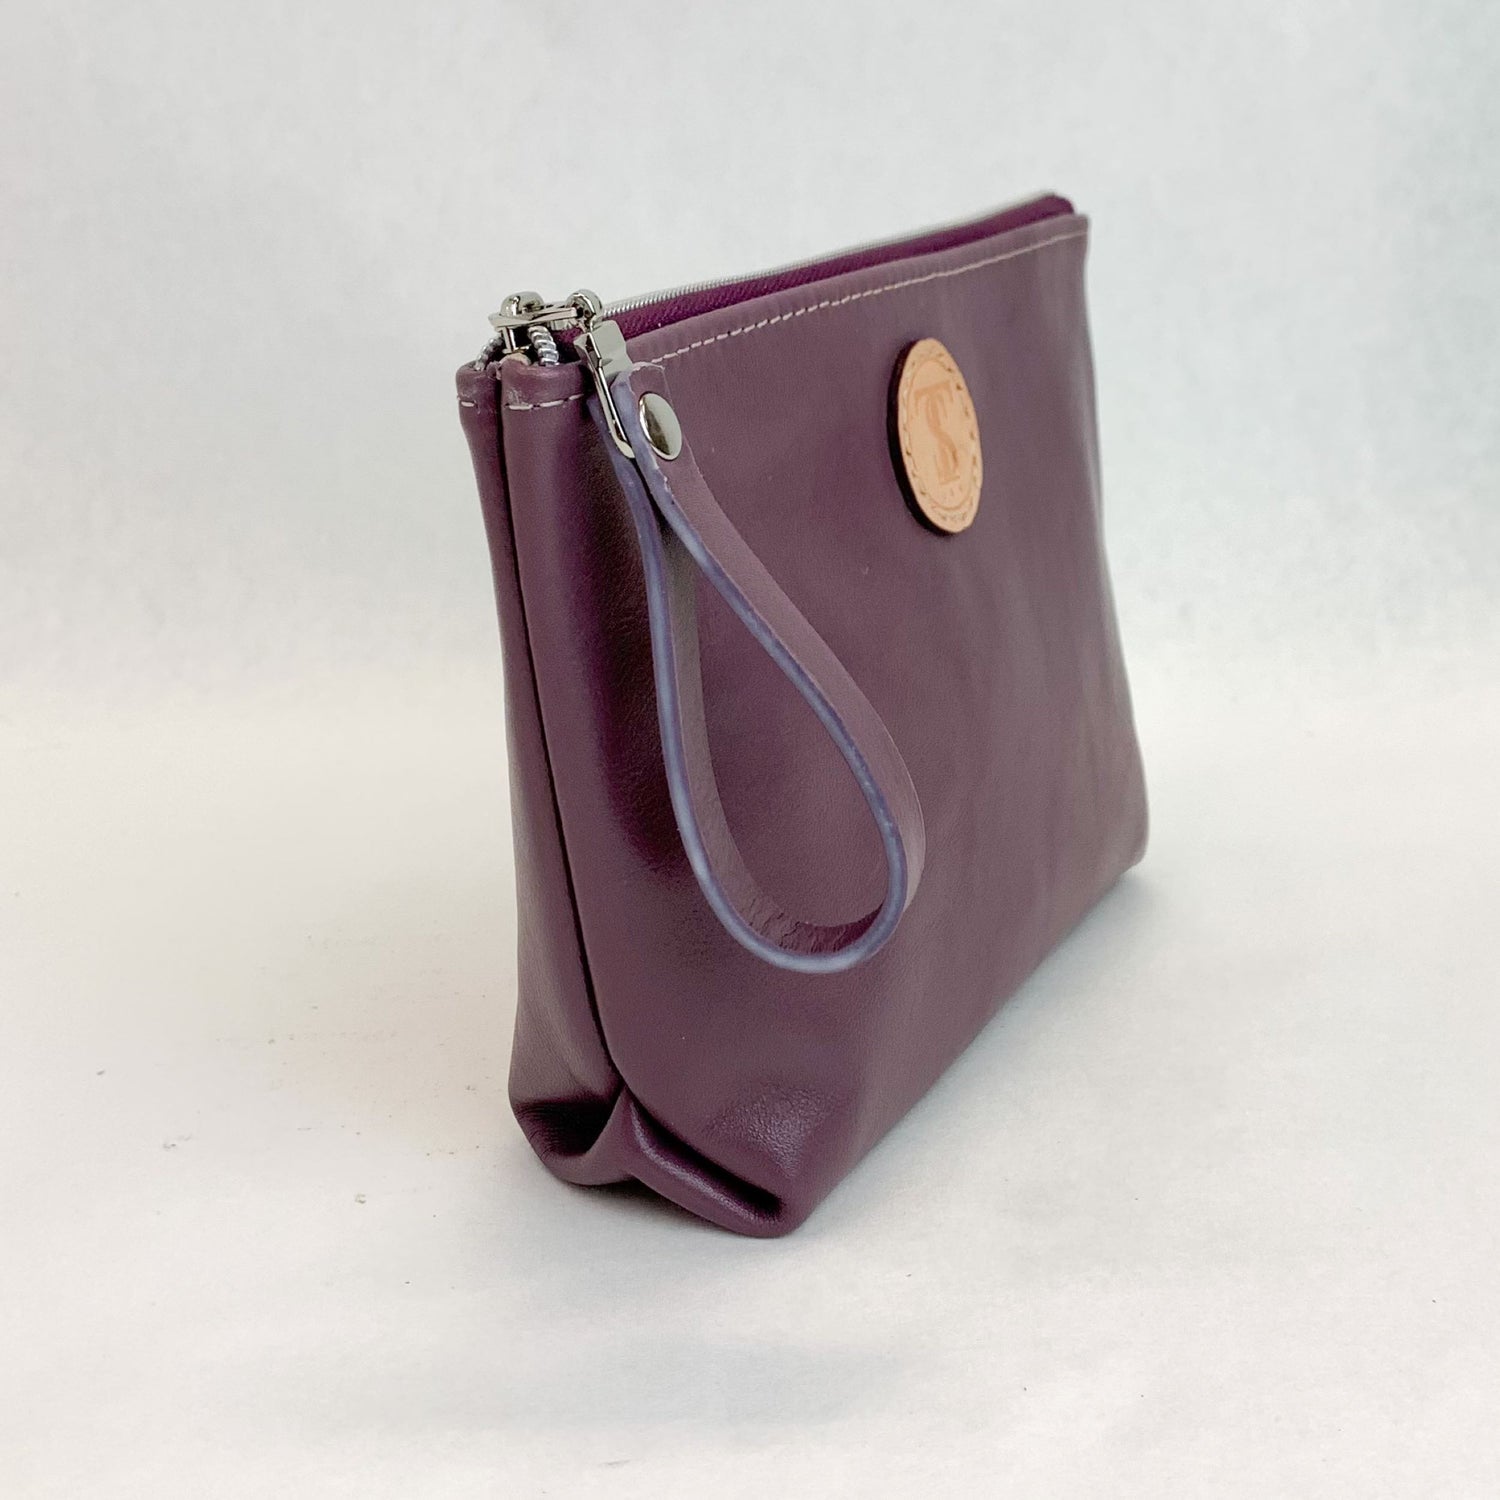 Side view T5 Cosmetics case toiletry bag designer handcrafted in smooth calf leather in lavender purple.